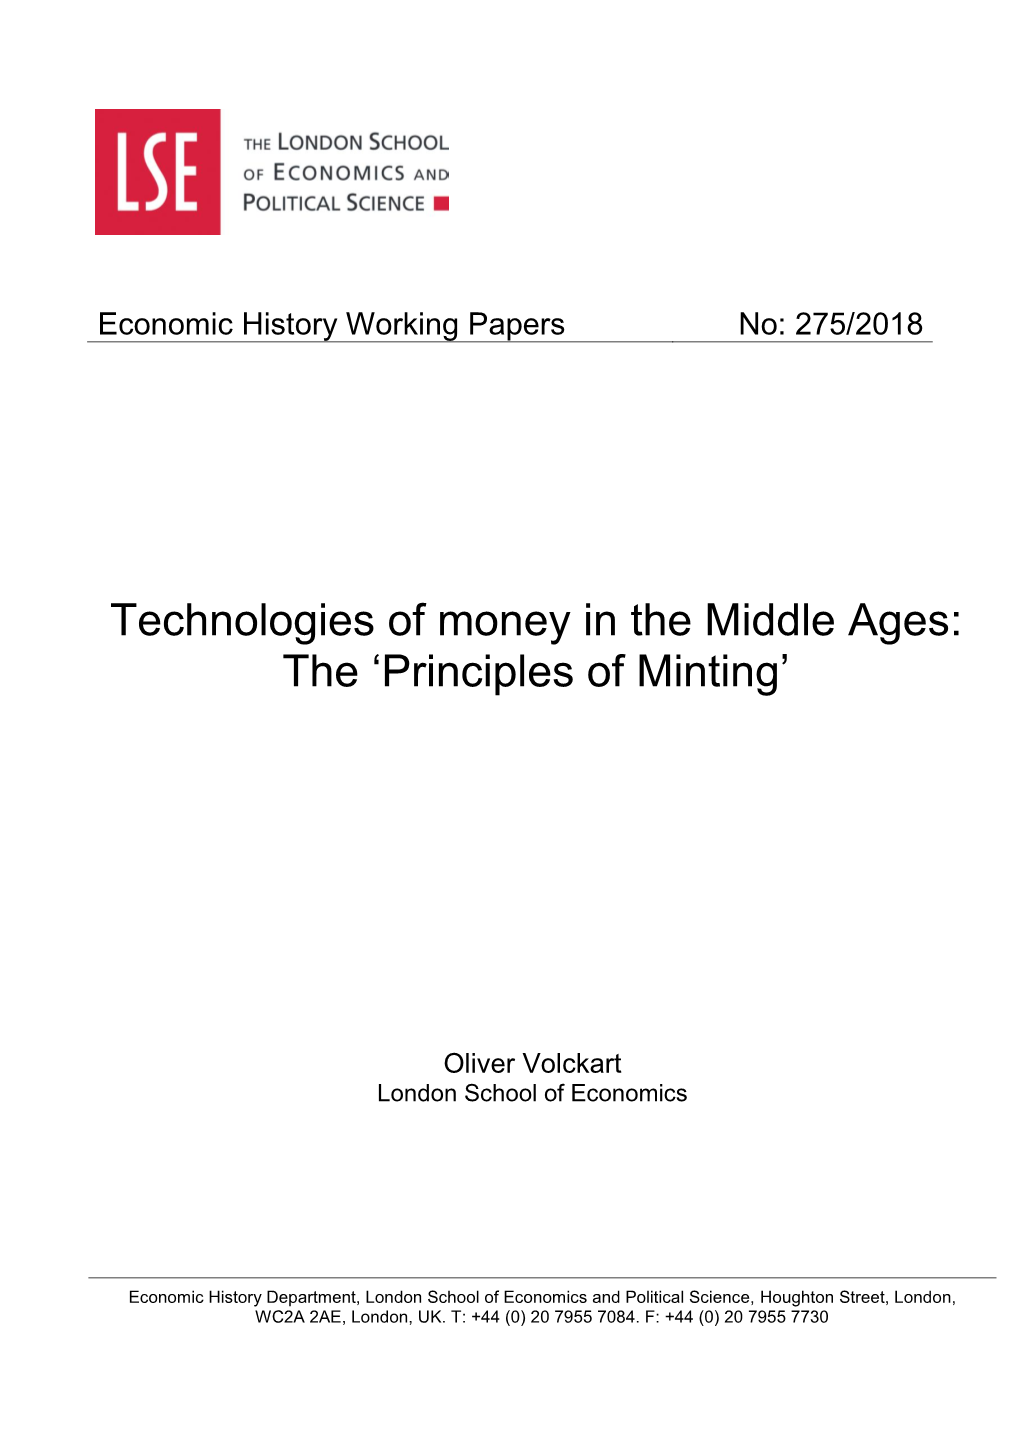 Technologies of Money in the Middle Ages: the 'Principles of Minting'